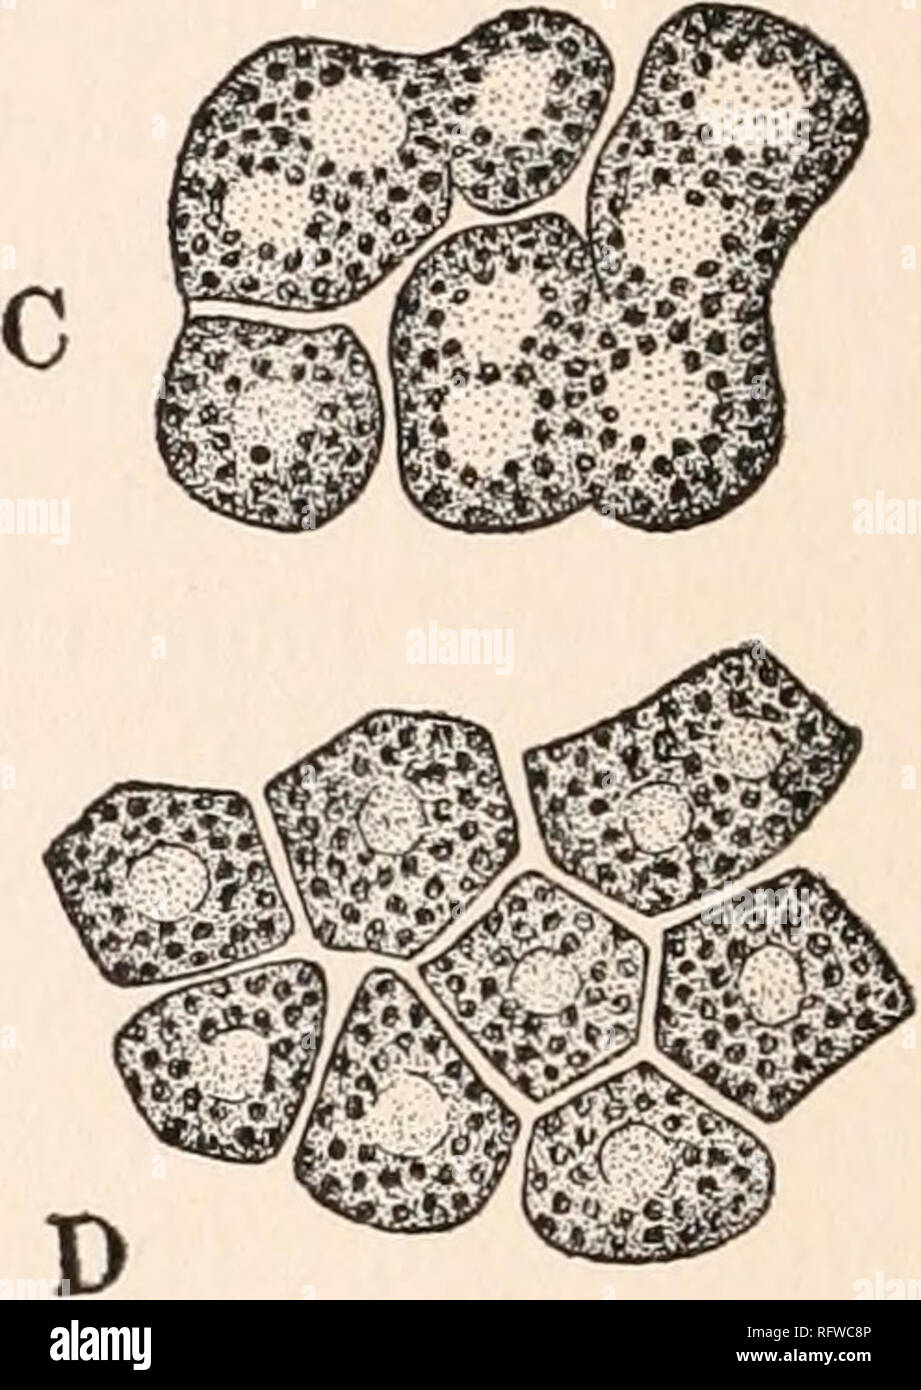 . Carnegie Institution of Washington publication. . FIG. 18.—Cell-cleavage in Hydrodictyon utriculatum.—(After Klebs.) A, cell showing cleavage furrows at early stage in the process; «, place in protoplasm free from chlorophyll. B, sausage-shaped protoplasts formed in early stage of cleavage. C, two protoplasts similar to those in B, showing manner of further cleavage. D, final result of the cleavage. contains a single nucleus. In this manner the entire protoplast is divided into uninucleated spores or gam- etes, as the case may be. Judging from Strasburger's account of the process in Ulothrix Stock Photo